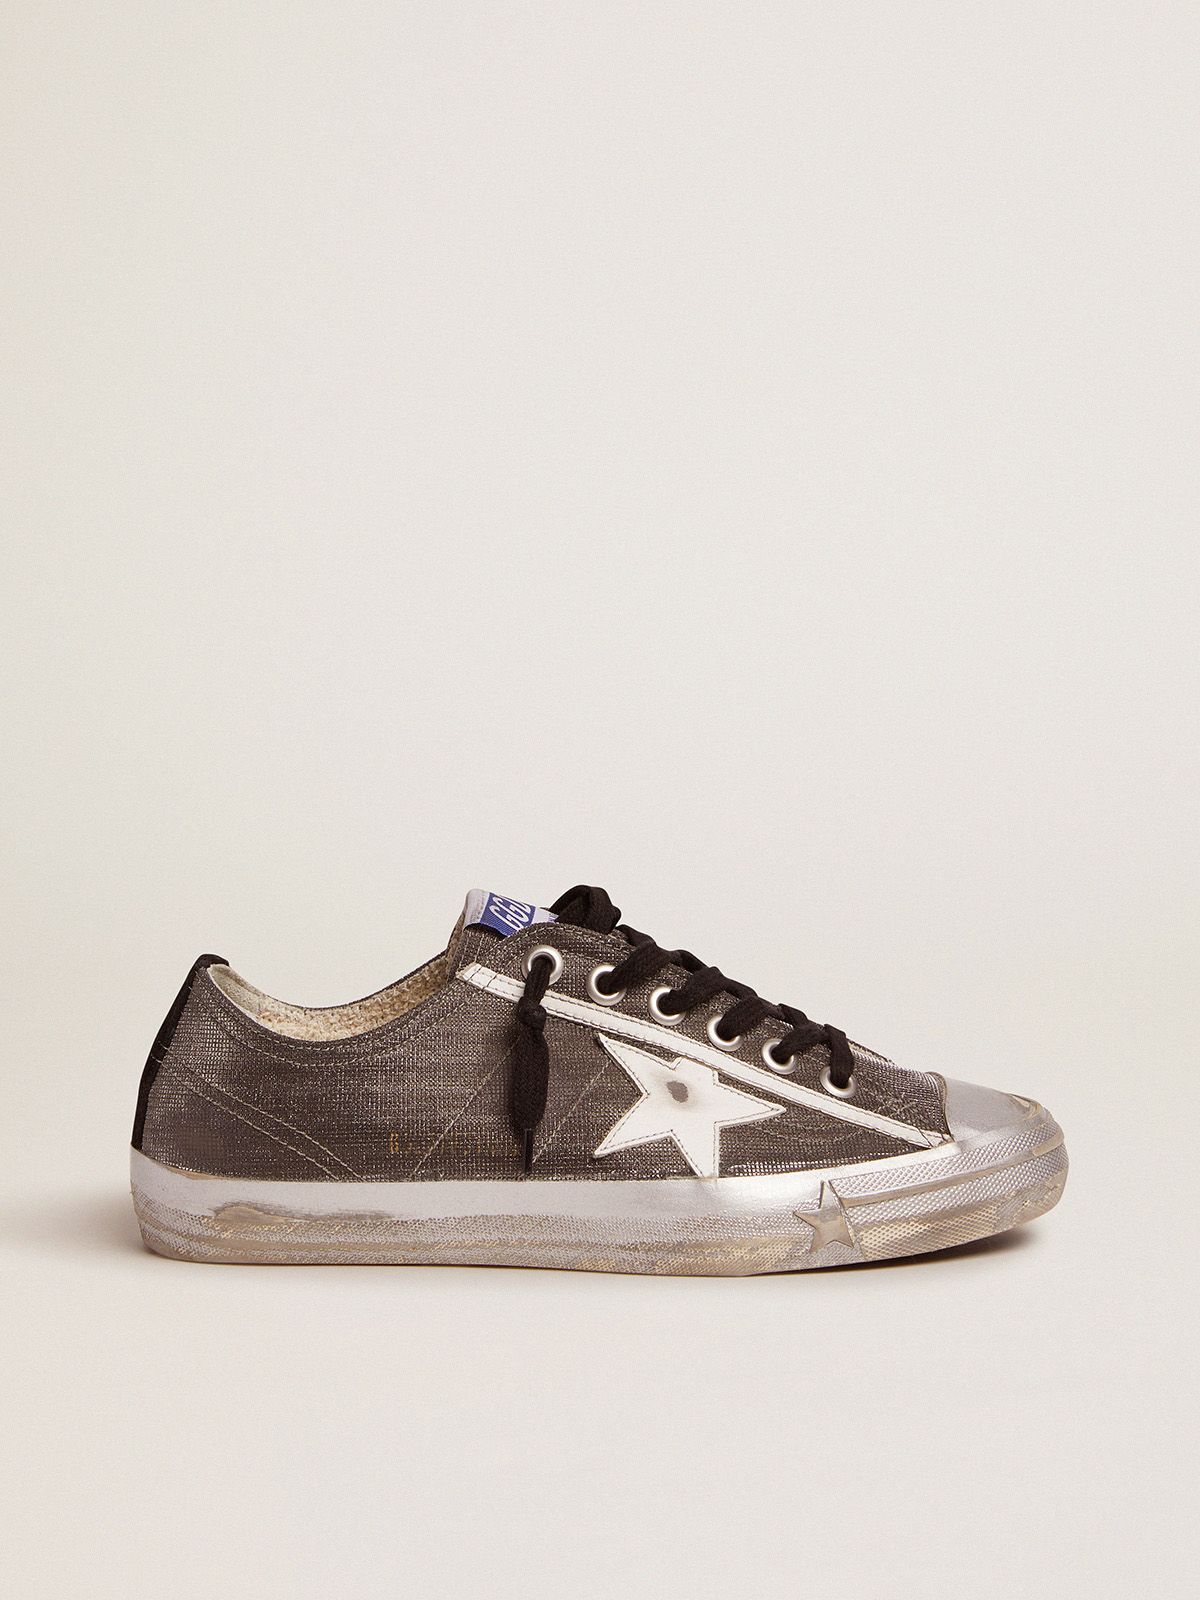 Dark gray V-Star LTD sneakers with checkered pattern and white star